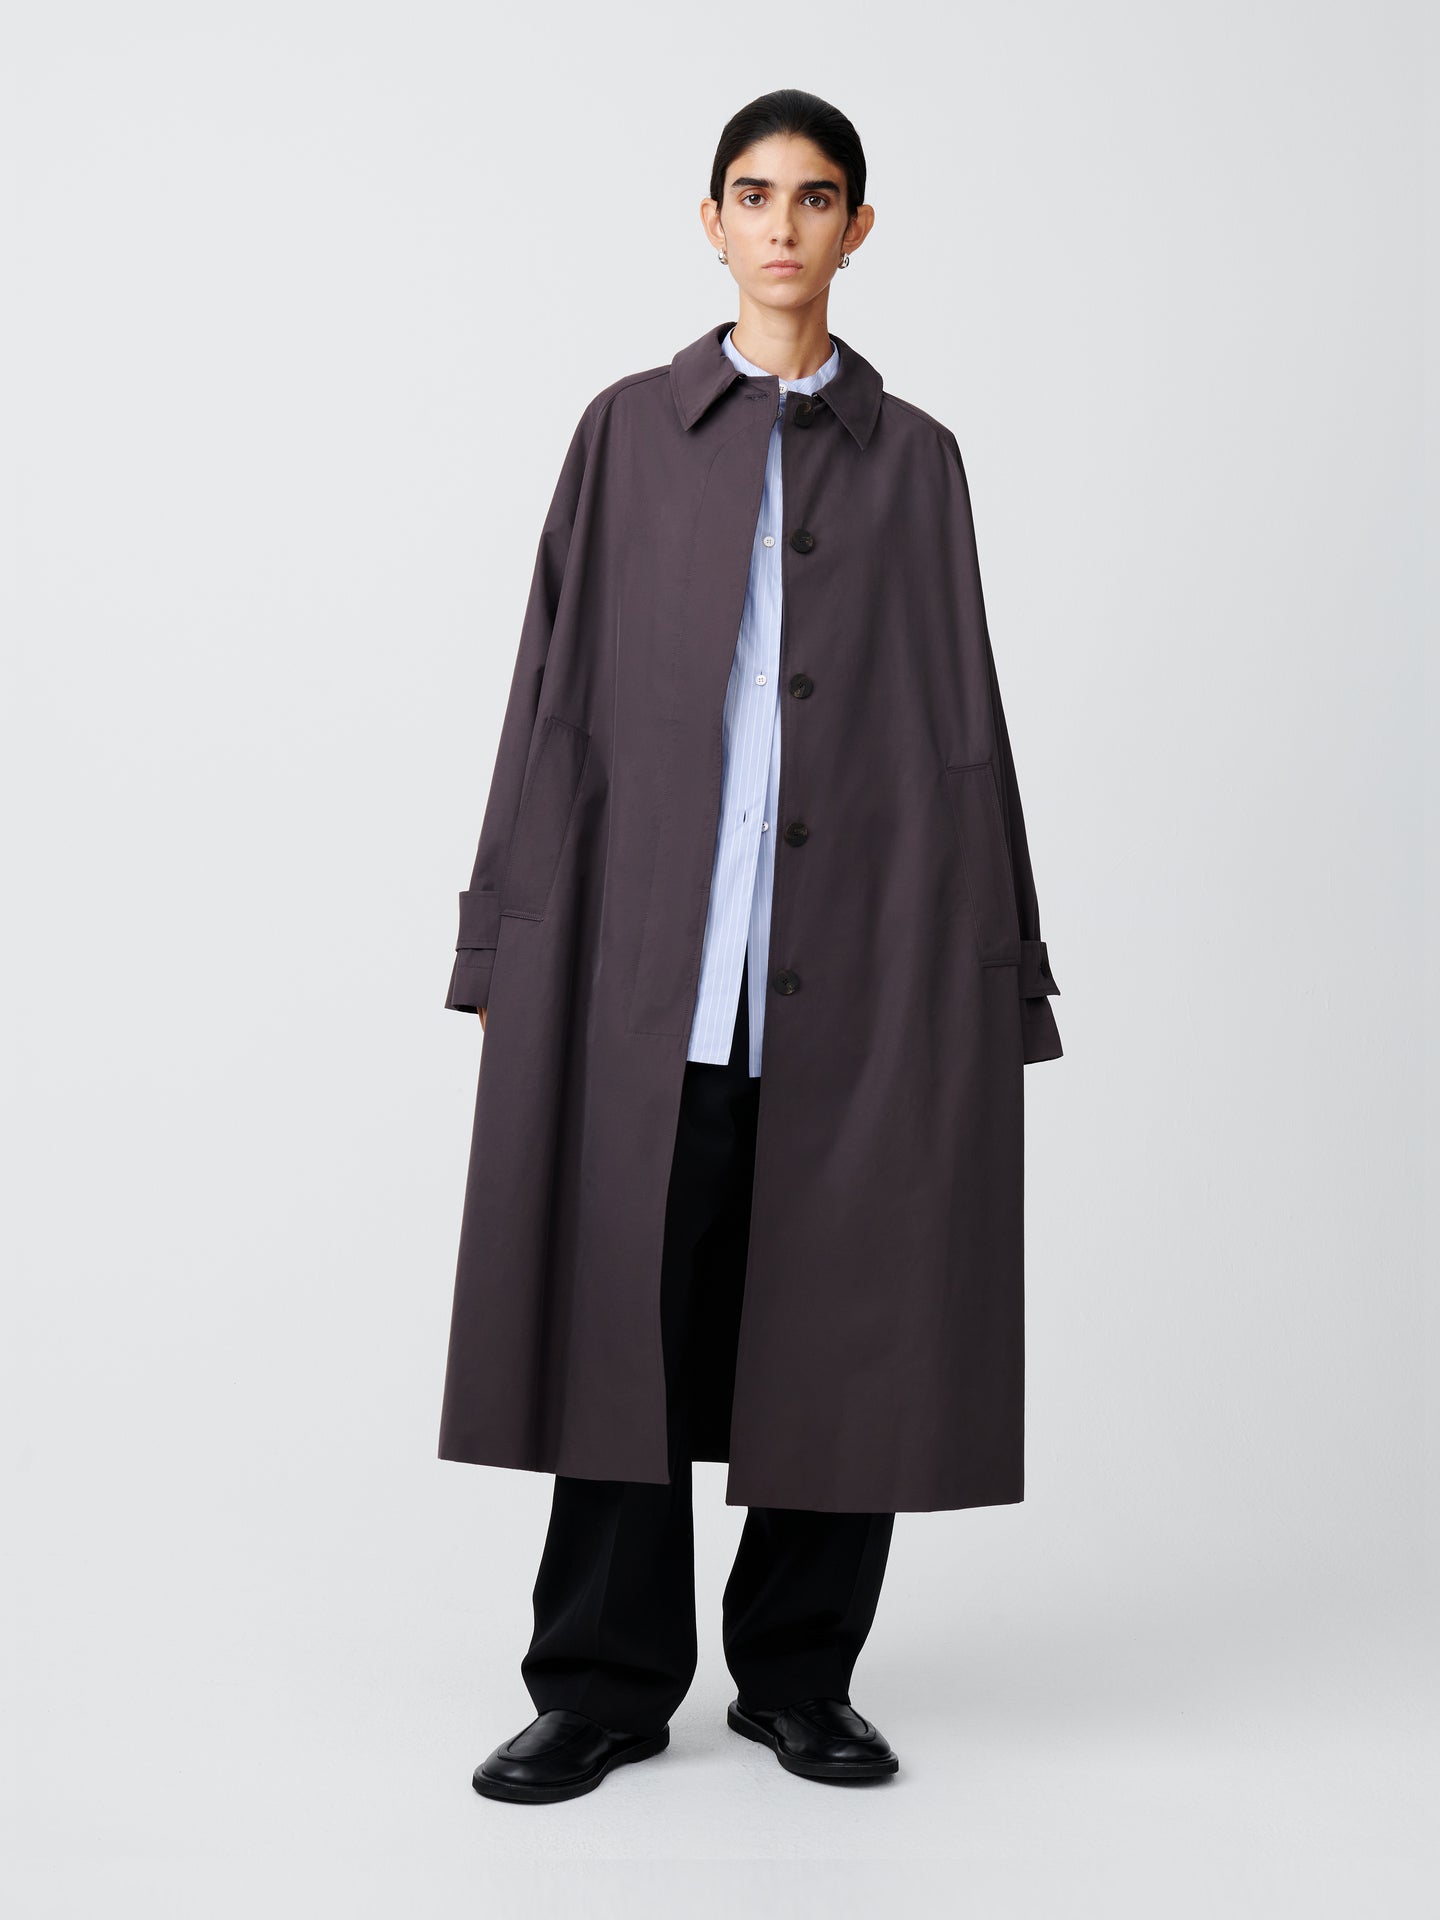 【EXCLUSIVE】HOLIN COAT IN COCOA